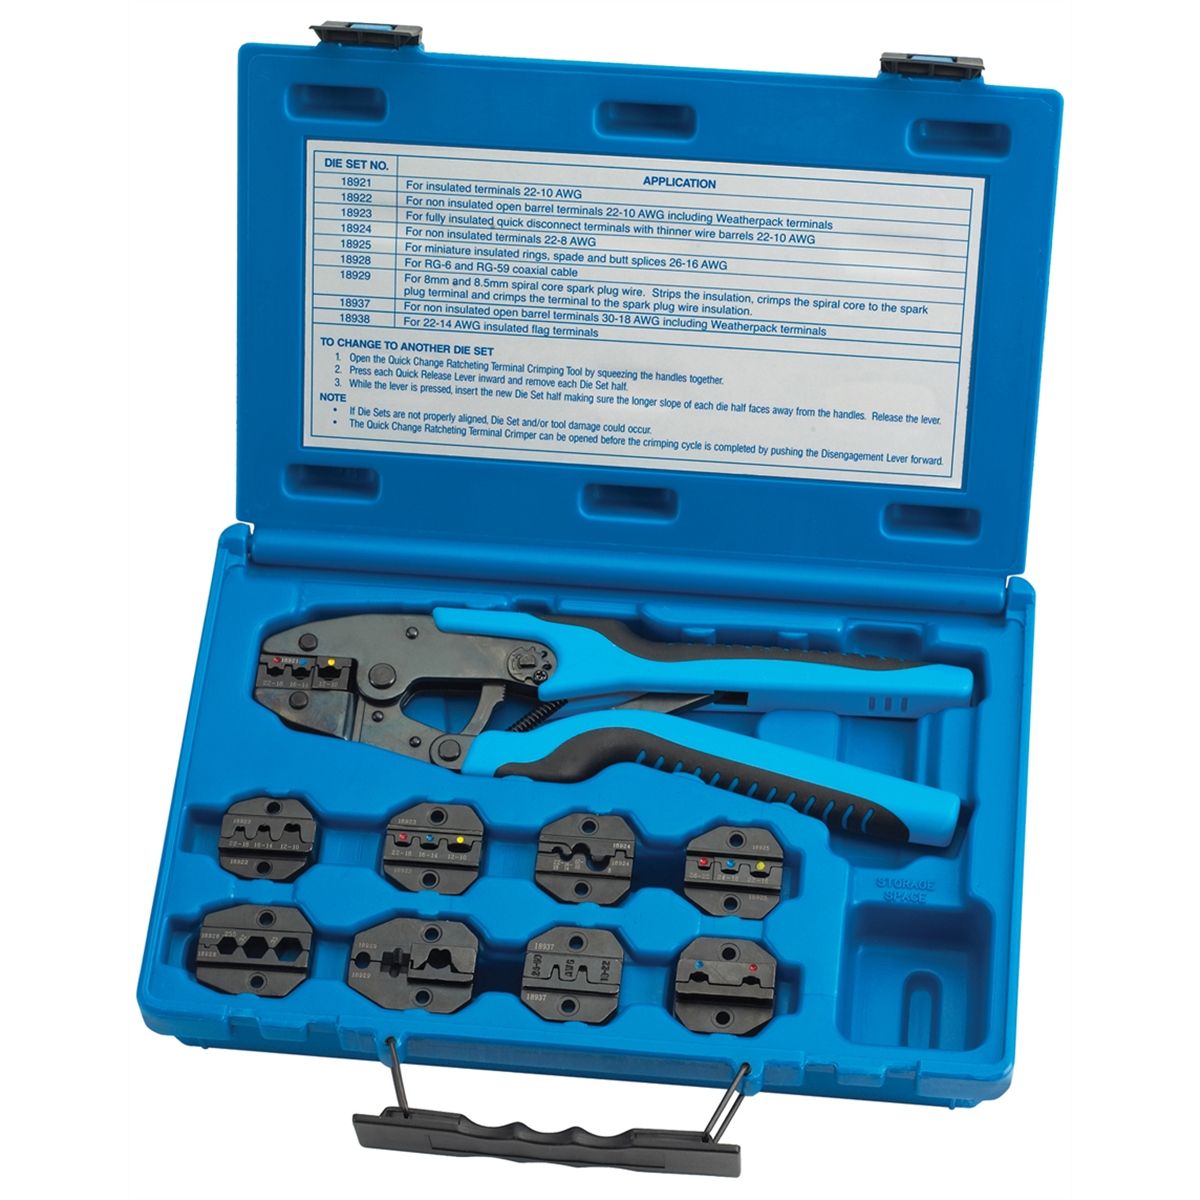 4 Sets of Dies RS Pro Ratchet Crimping Tool 848-391, 